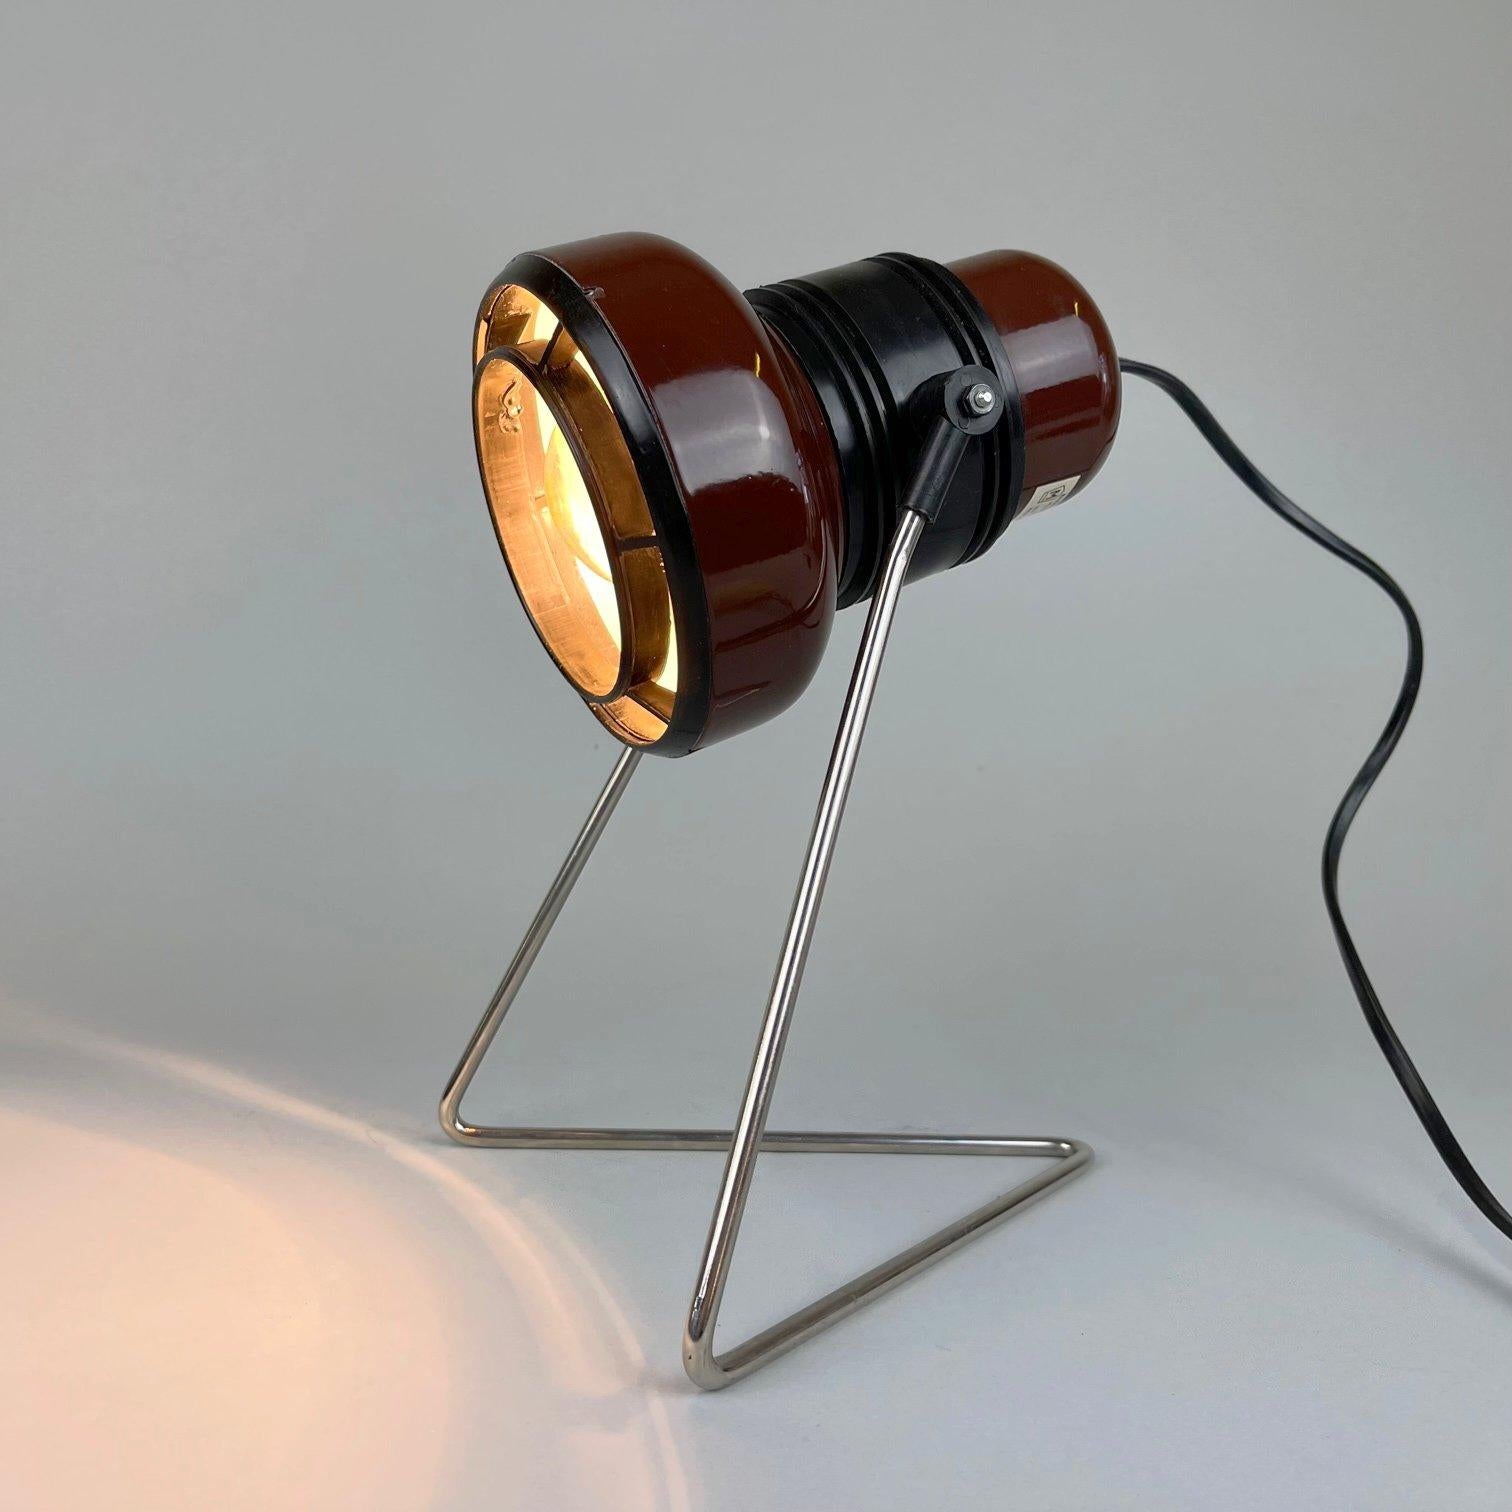 Vintage adjustable table lamp made of metal and plastic. Can be also hanged on the wall. Bulb: 1 x E25-E27.
 